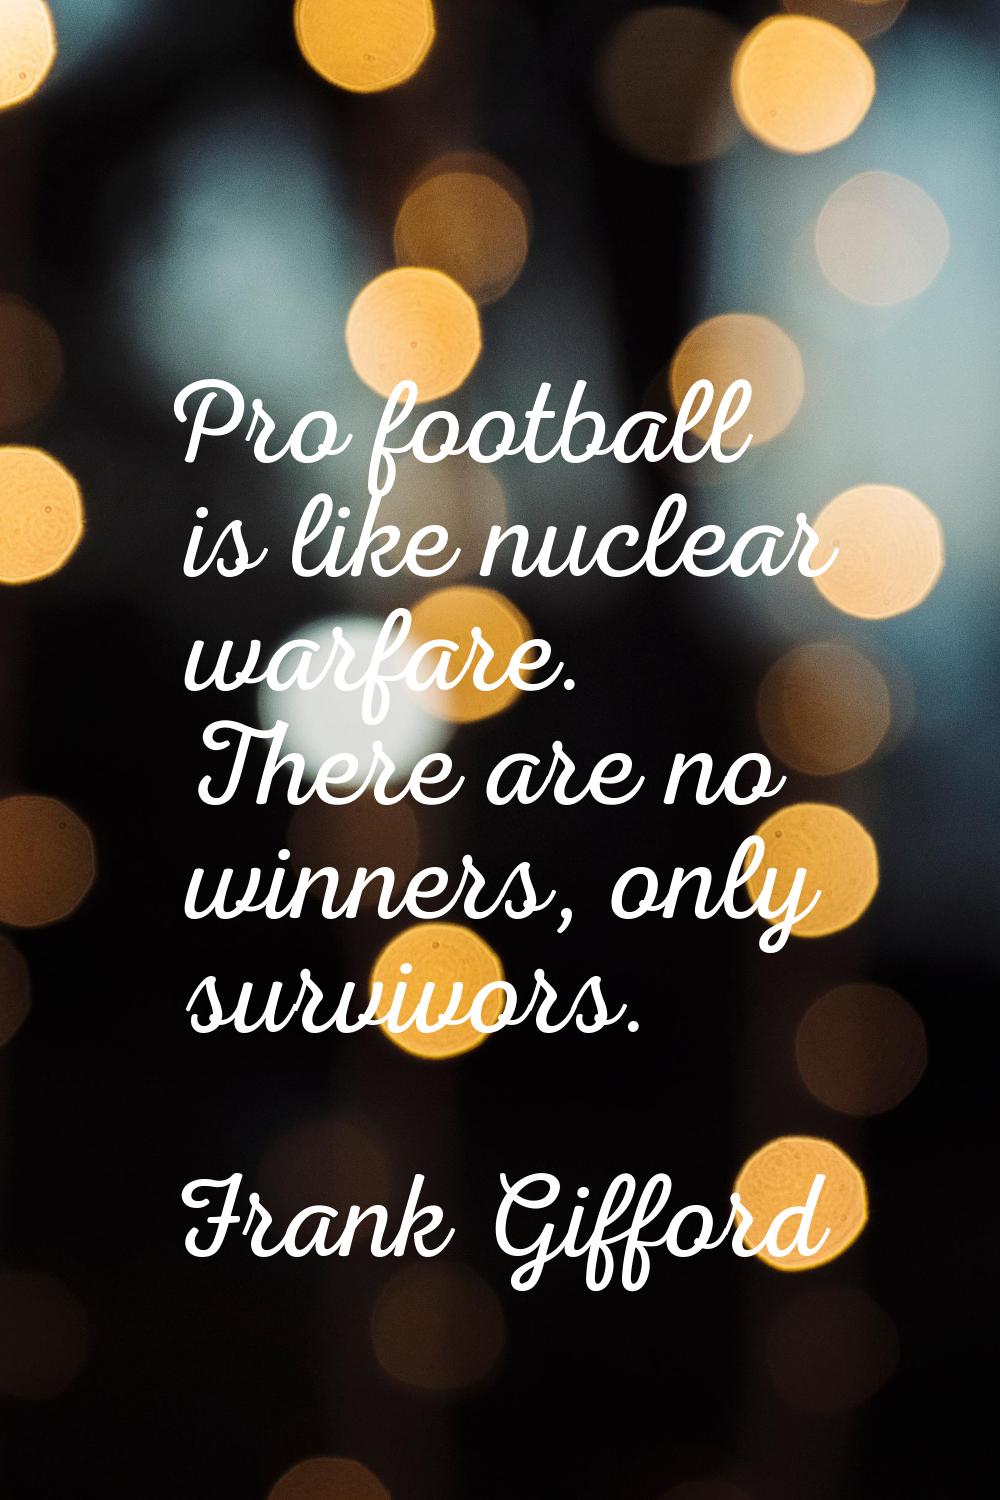 Pro football is like nuclear warfare. There are no winners, only survivors.